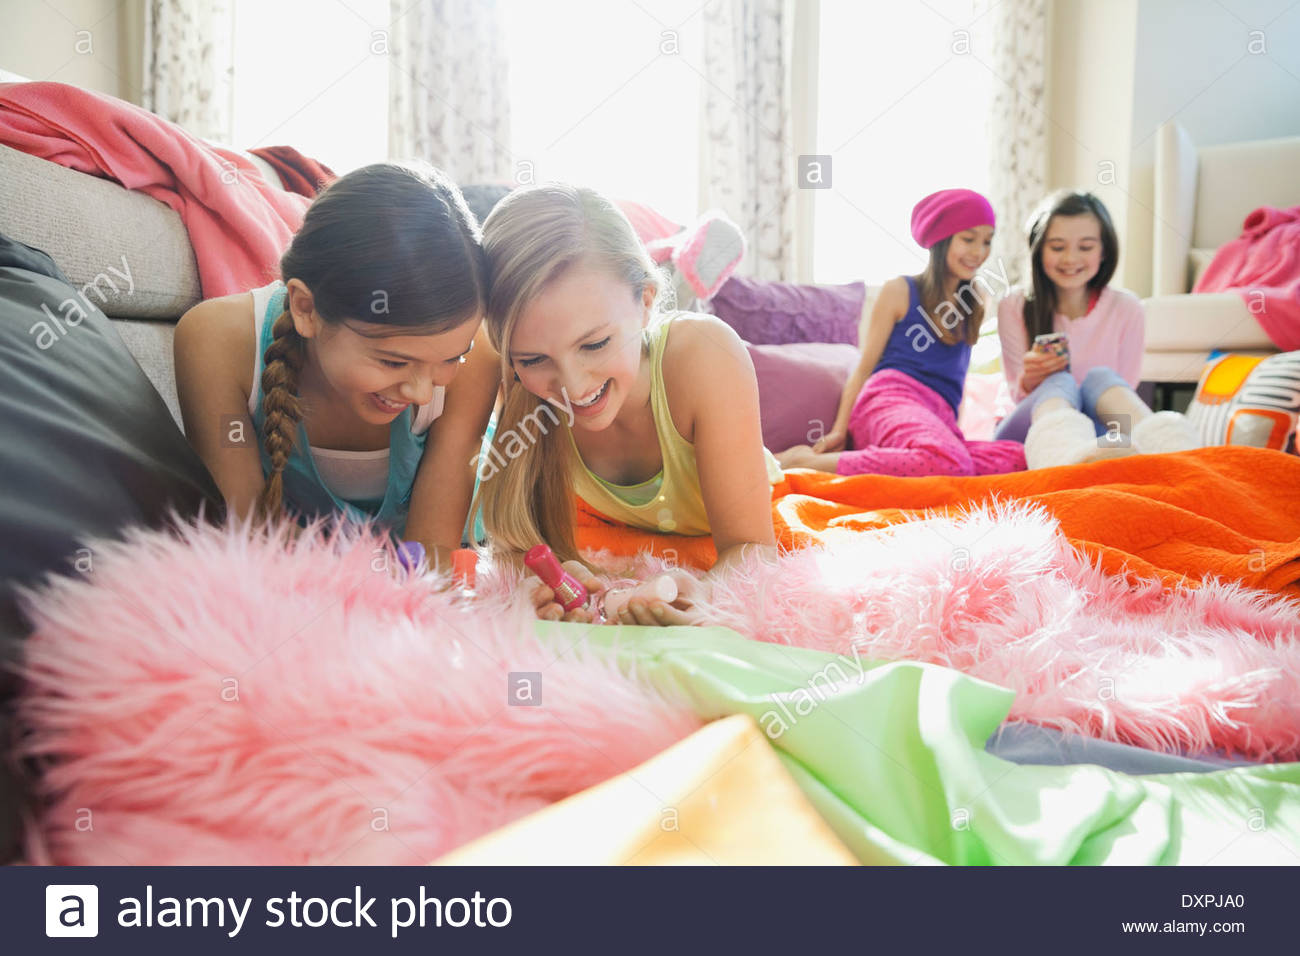 Girls hanging out at slumber party Banque D'Images